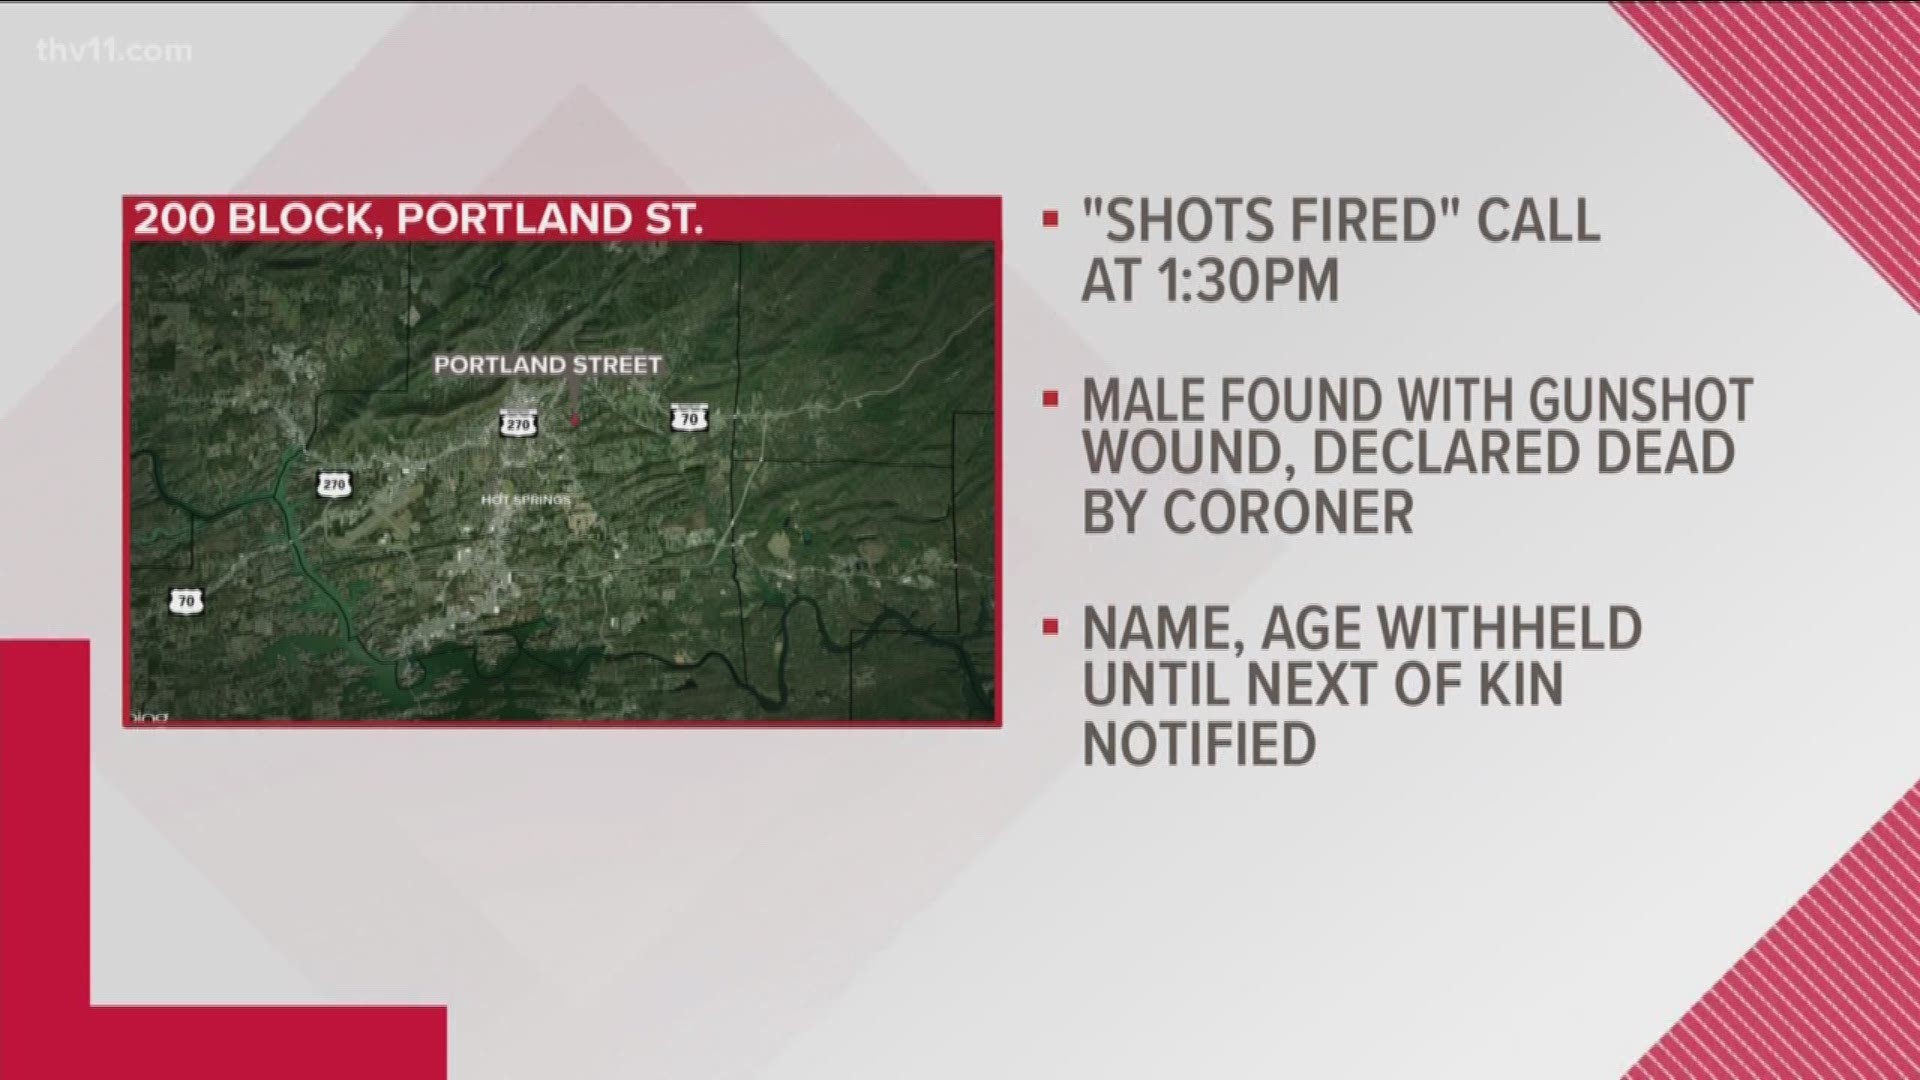 Hot Springs police are looking into a shooting death on Portland Street.